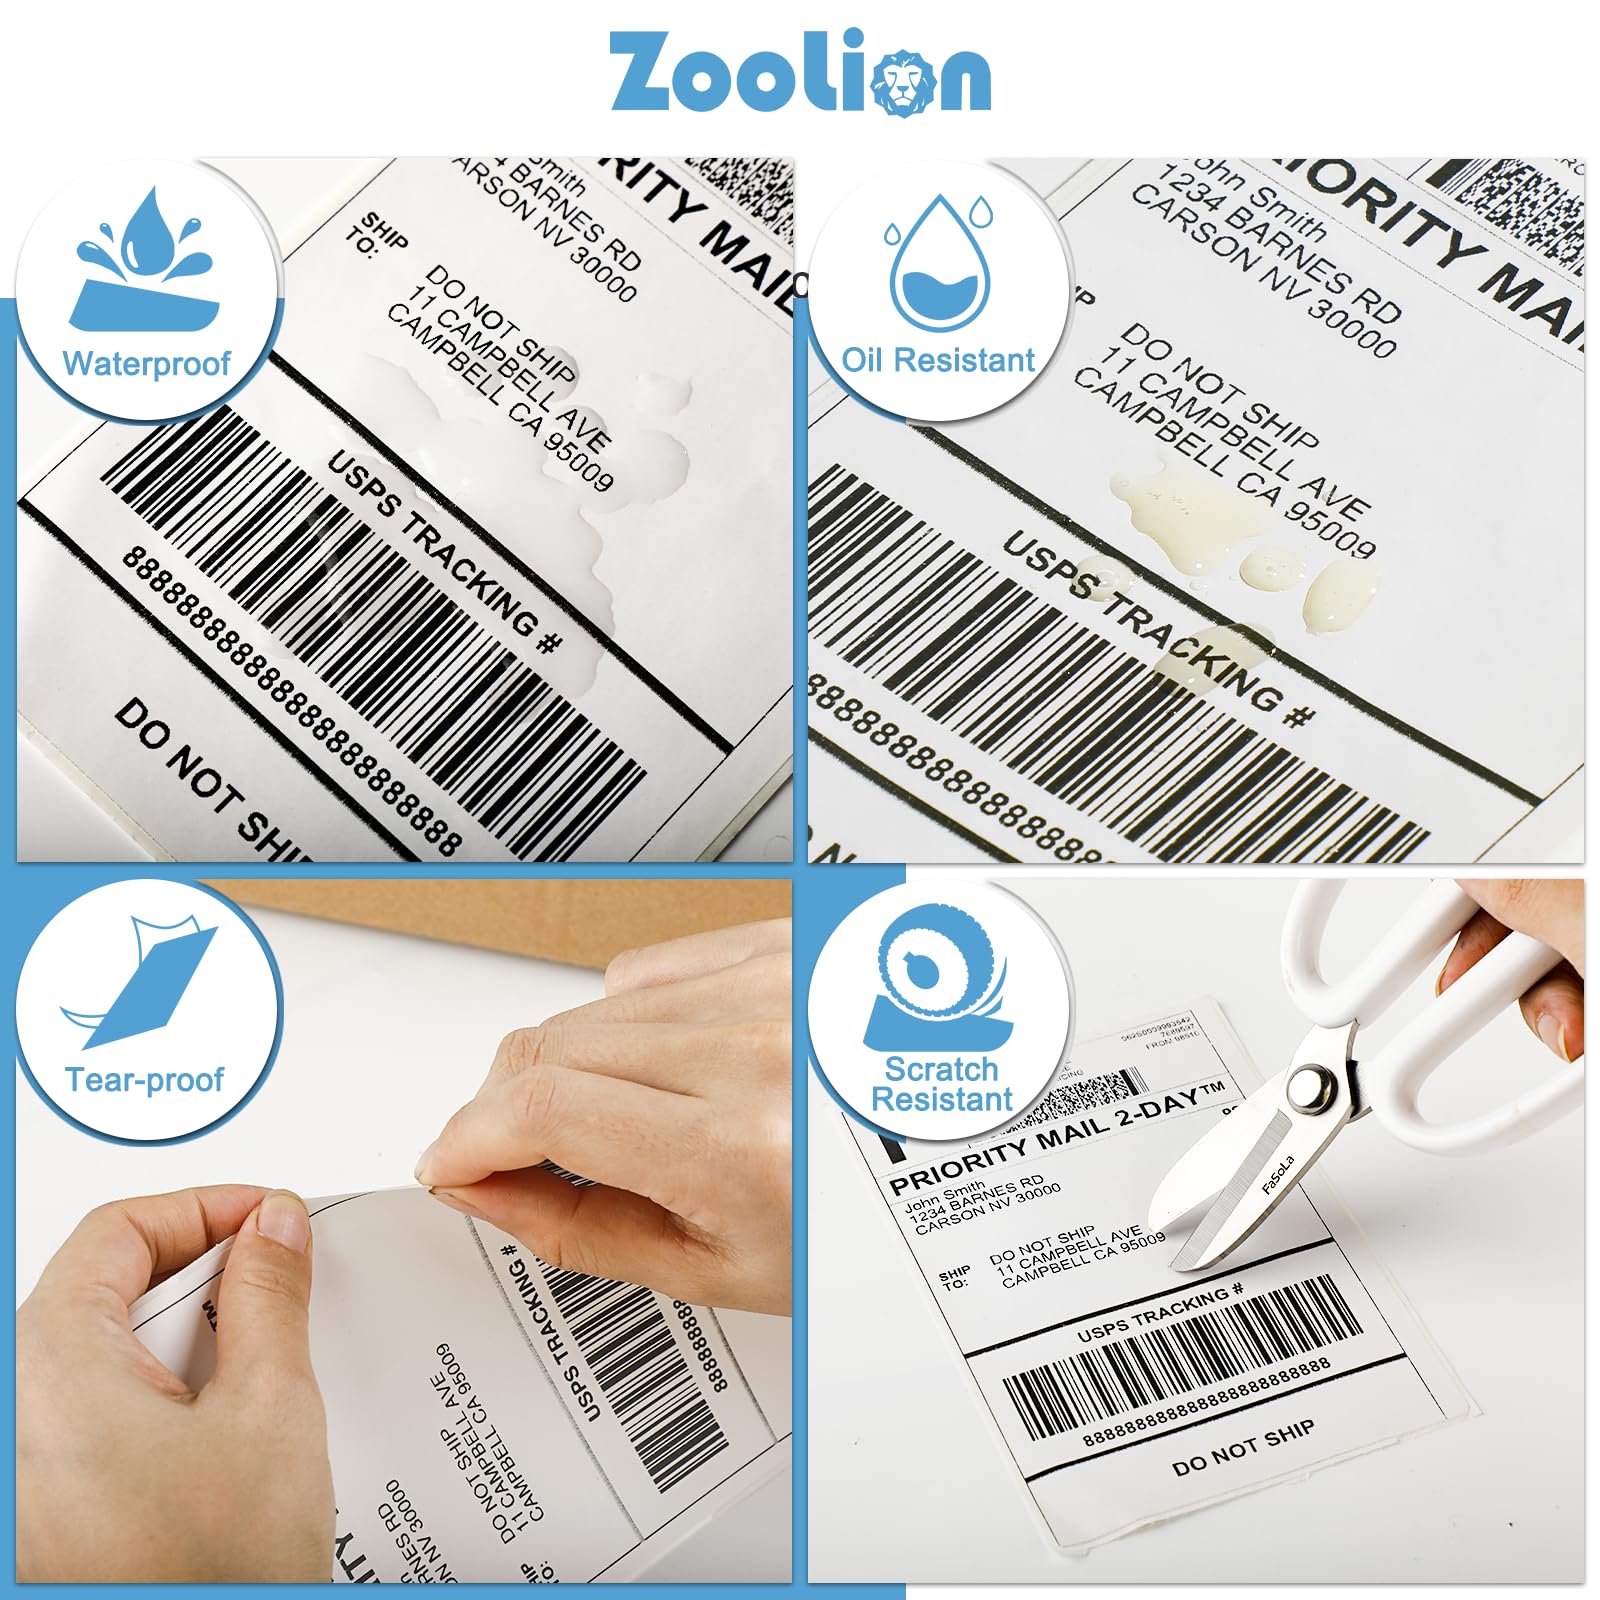 Thermal Labels 4" x 6", 2.42 lb, 1 Ream, 500 Sheets, White, D520BT Paper Compatible with Zoolion DYMO MUNBYN Omezizy Rollo JADENS Phomemo and Other 4x6 Shipping Label Printers.